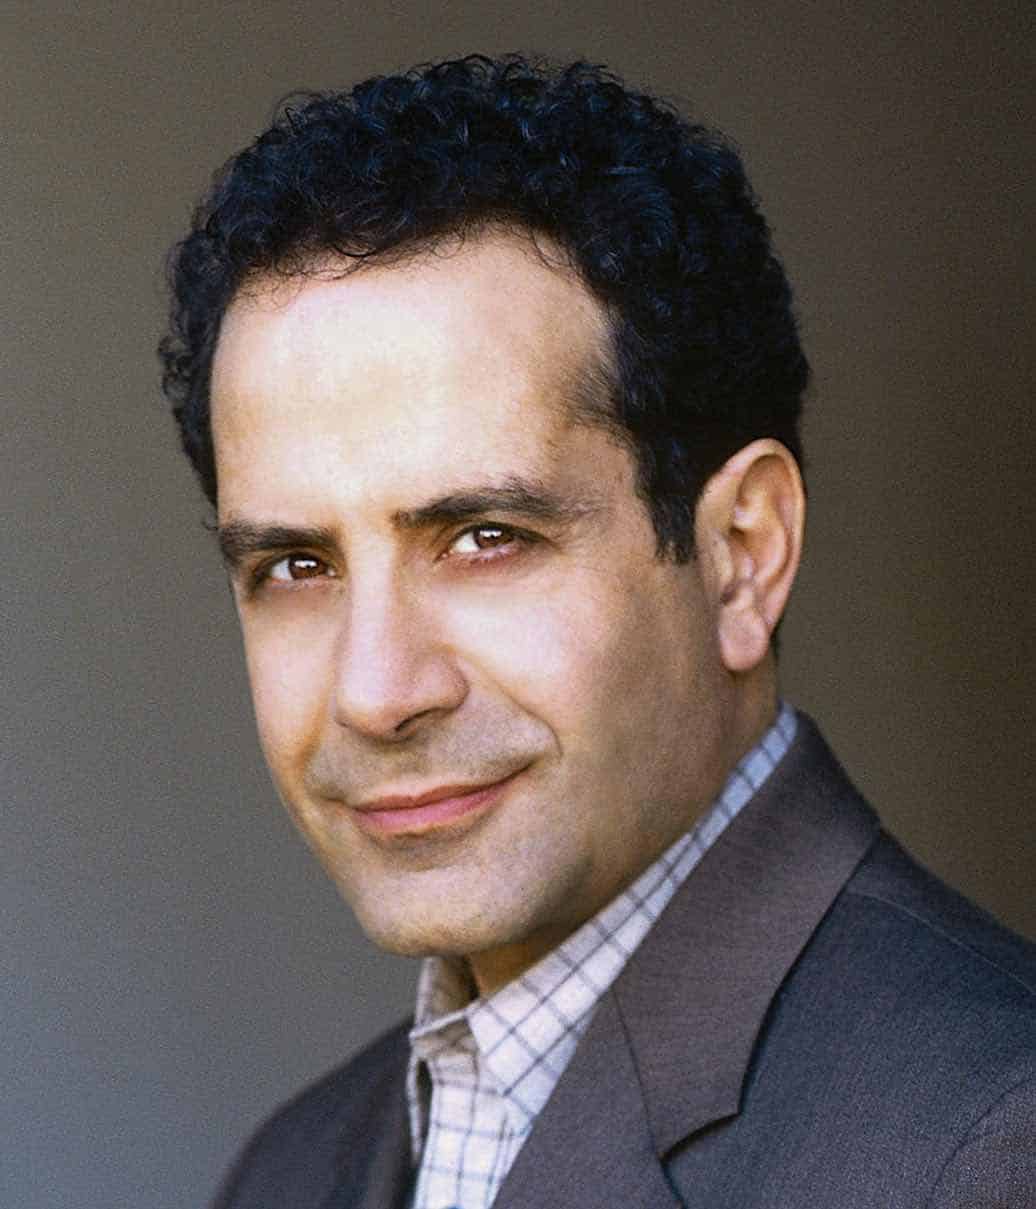 Filename - MONK_USA_00025AERF -- Monk -- USA Network -- Original Series --  -- Tony Shalhoub --  -- ©Andrew Eccles/USA Network --FOR EDITORIAL USE ONLY--NOT FOR RESALE/DO NOT ARCHIVE